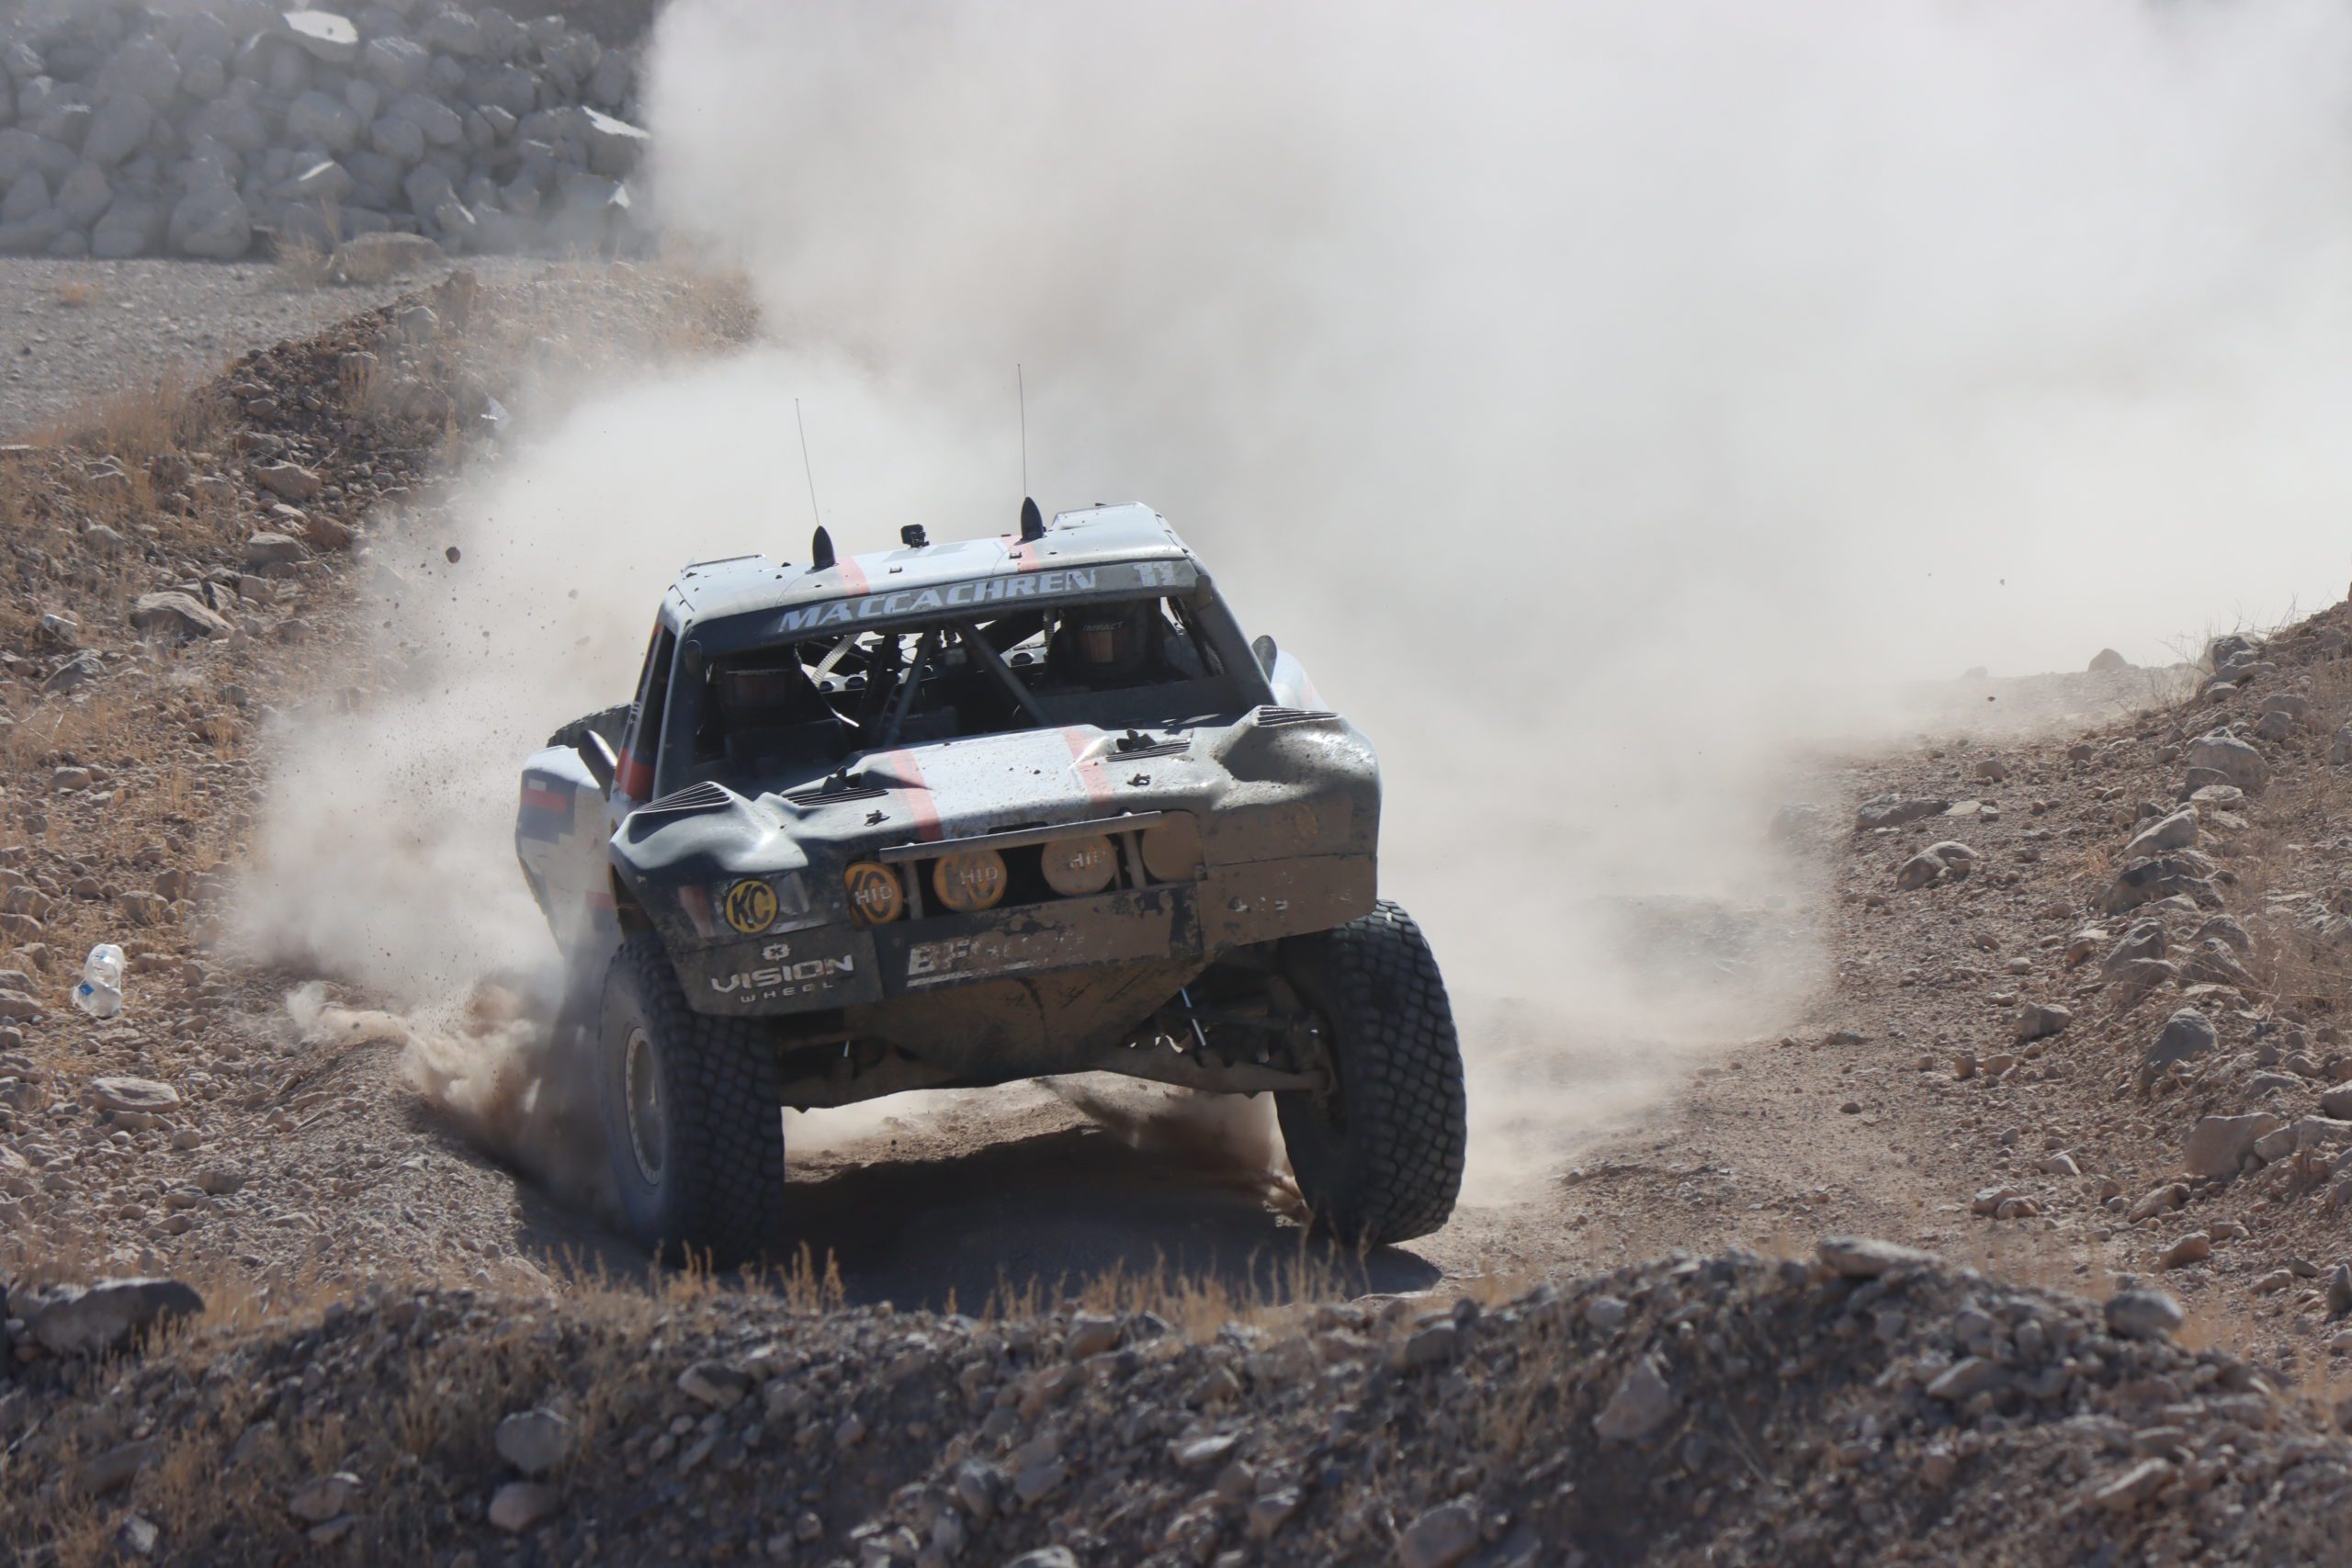 action photo of Rob MacCachren and his trophy truck racing through the desert in the afternoon. A huge dust cloud of dirt is trailing his truck, which is coming toward the camera